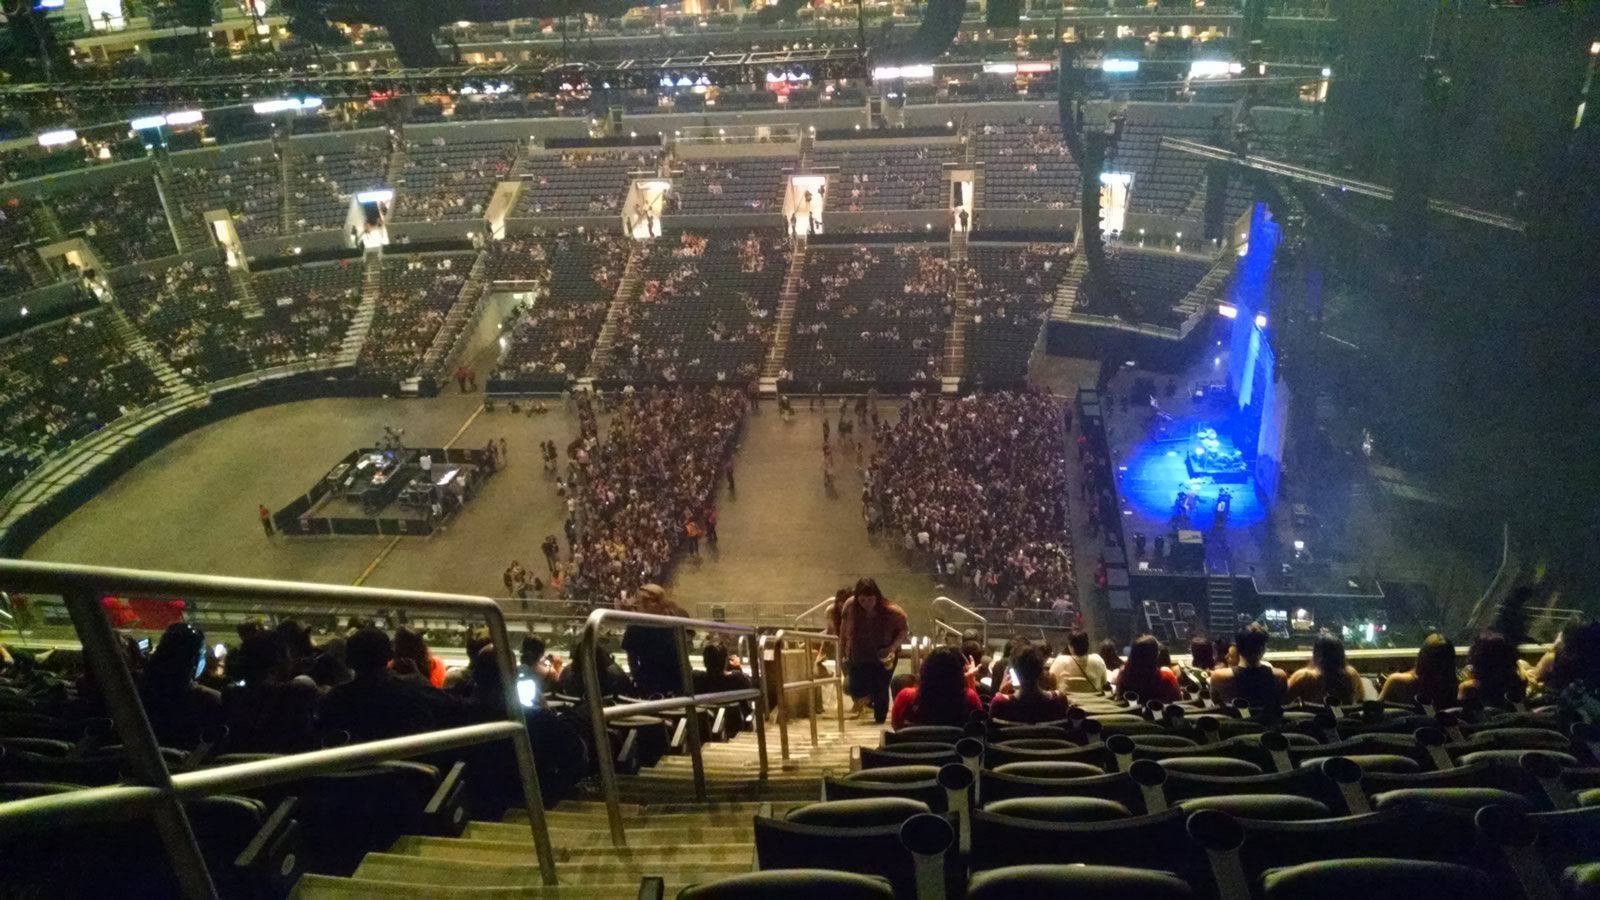 section 333, row 15 seat view  for concert - crypto.com arena